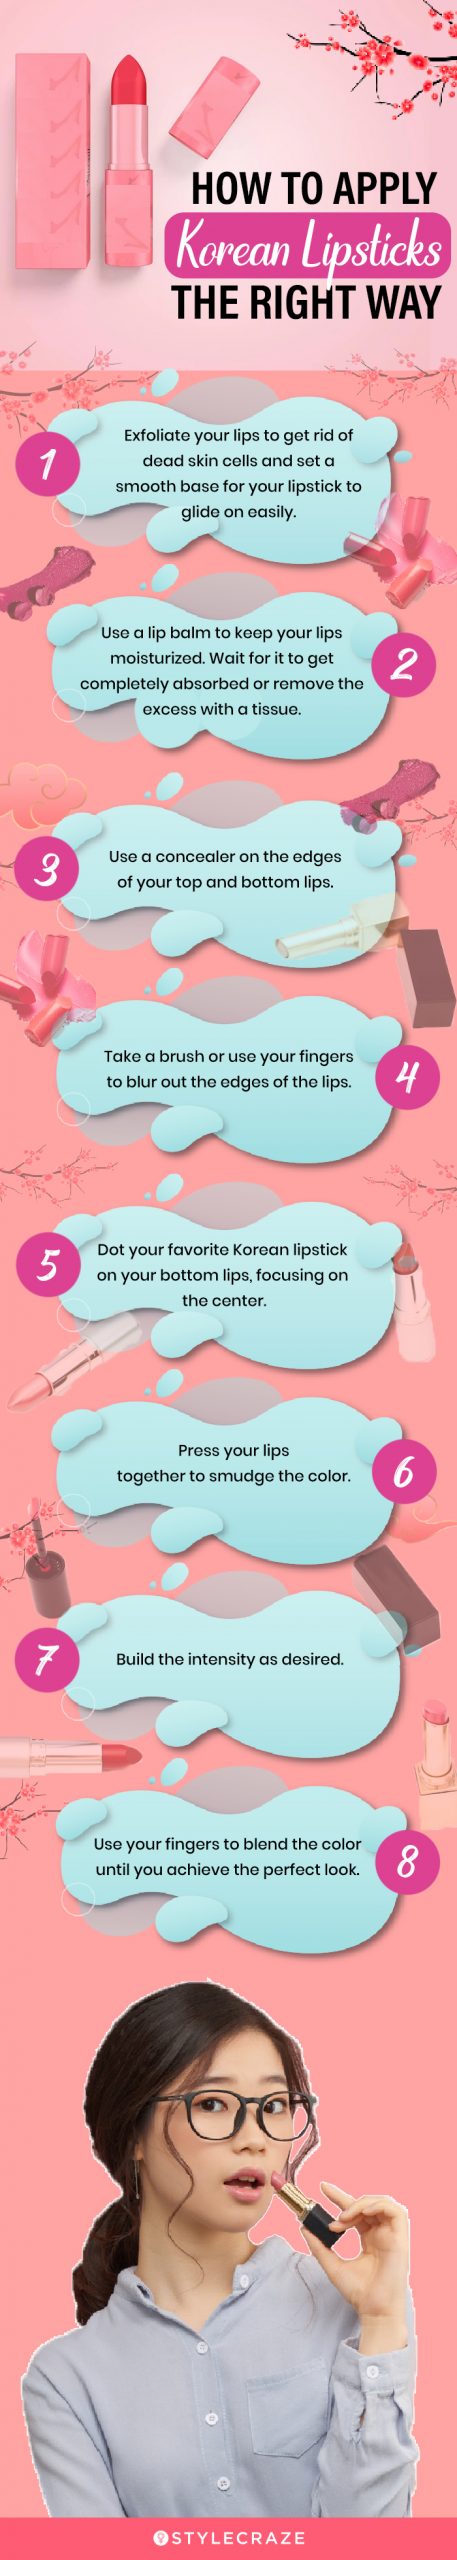 How To Apply Korean Lipstick The Right Way